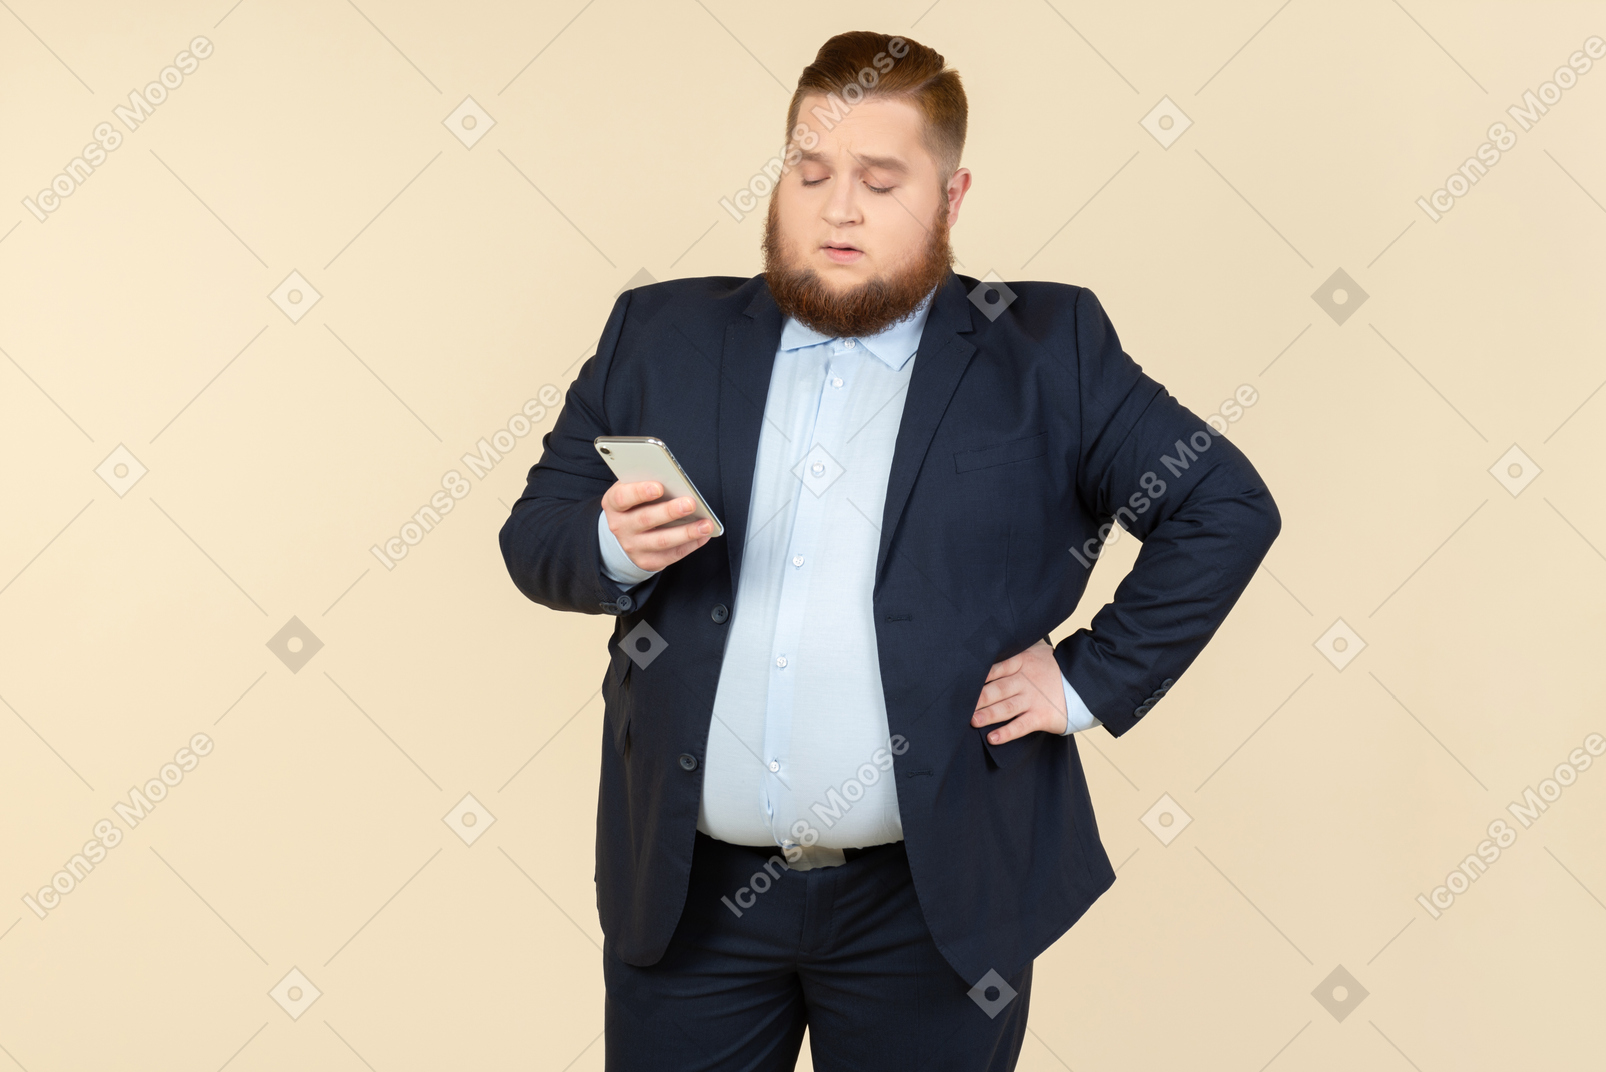 Young overweight office worker checking smartphone